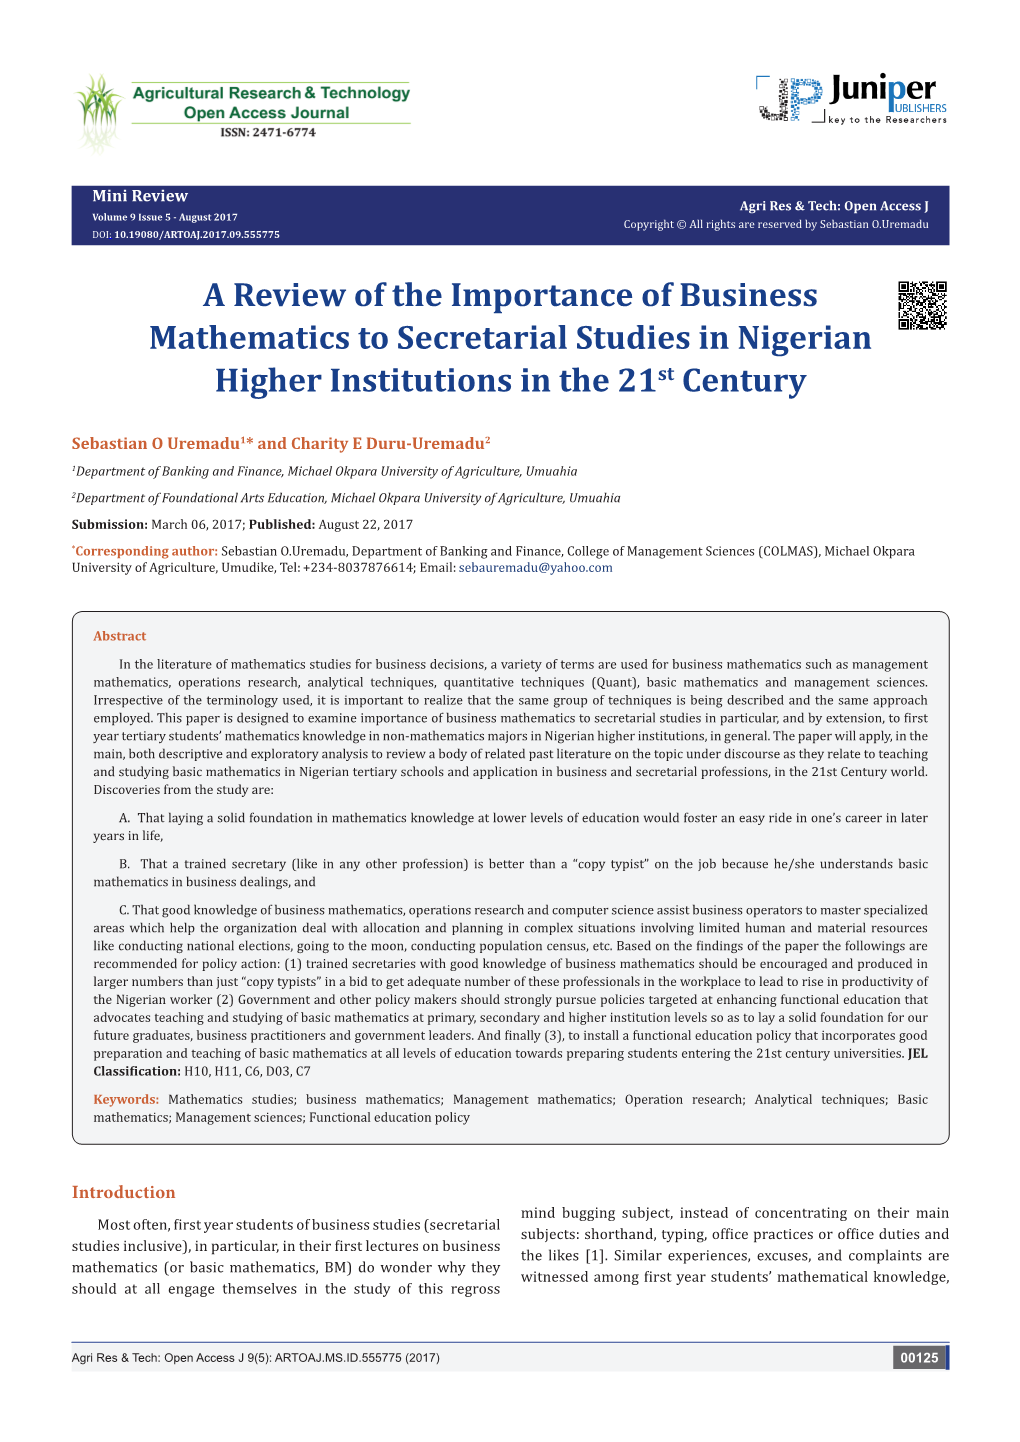 A Review of the Importance of Business Mathematics to Secretarial Studies in Nigerian Higher Institutions in the 21St Century